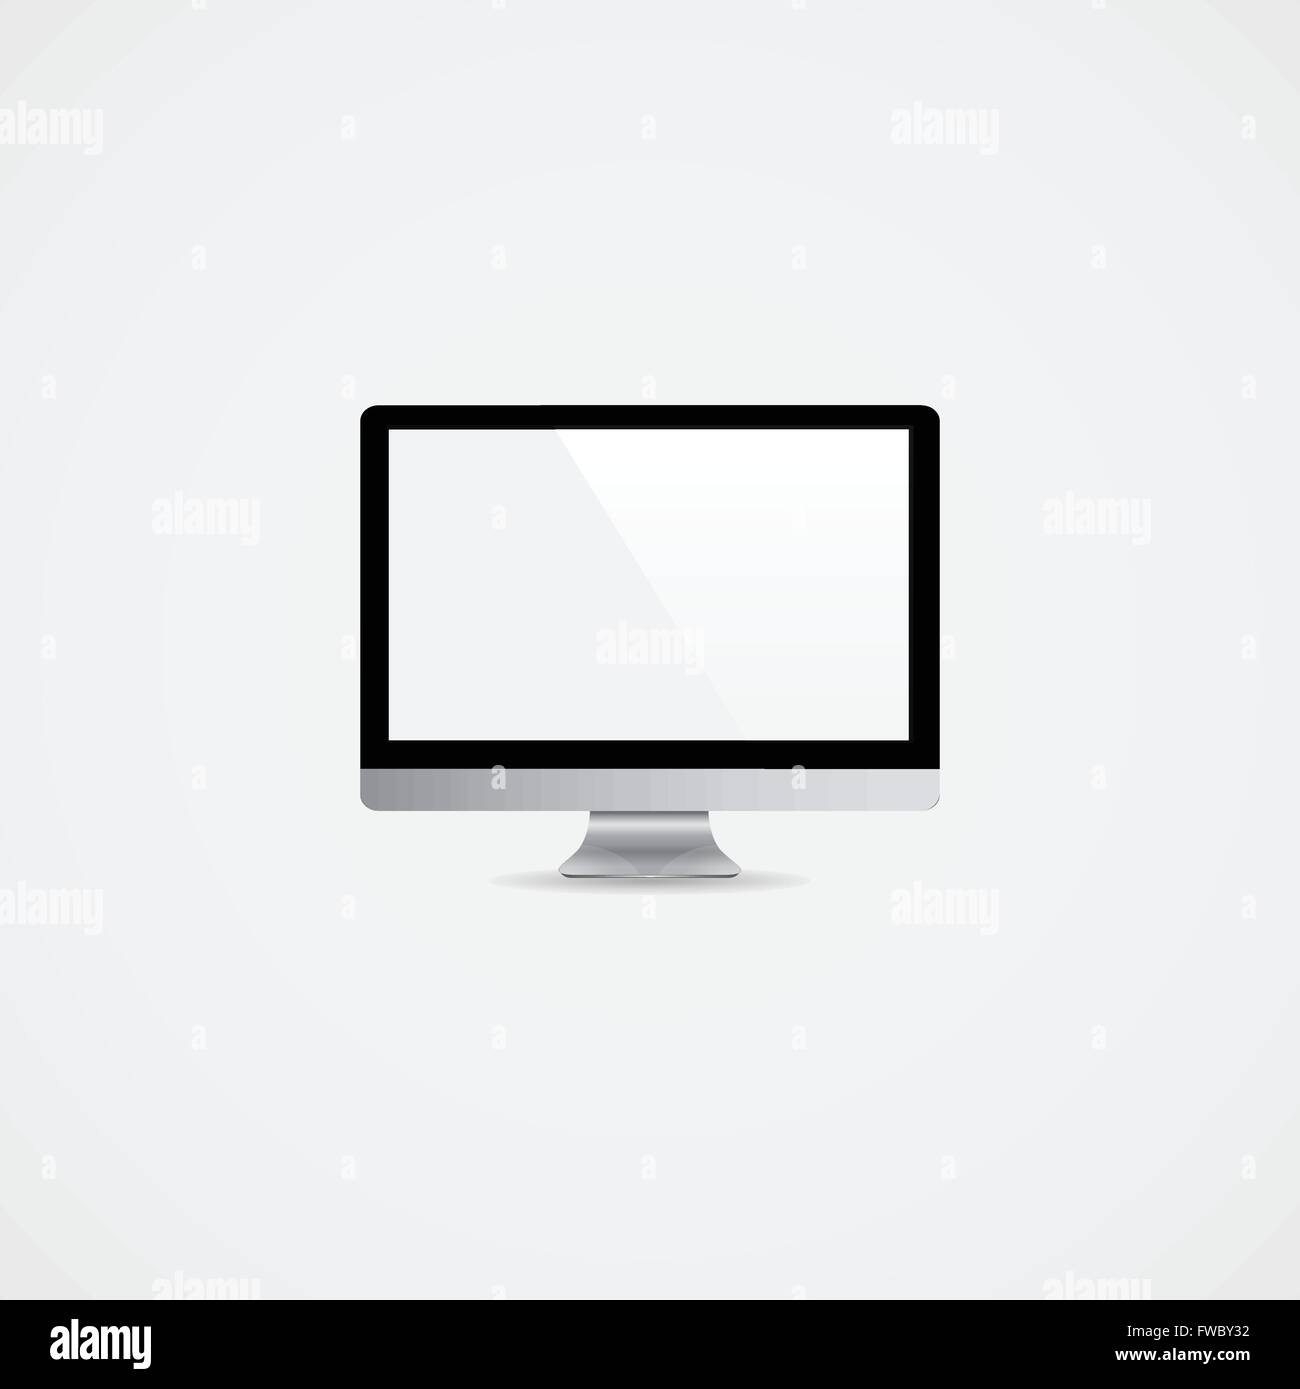 Monitor Background Stock Vector